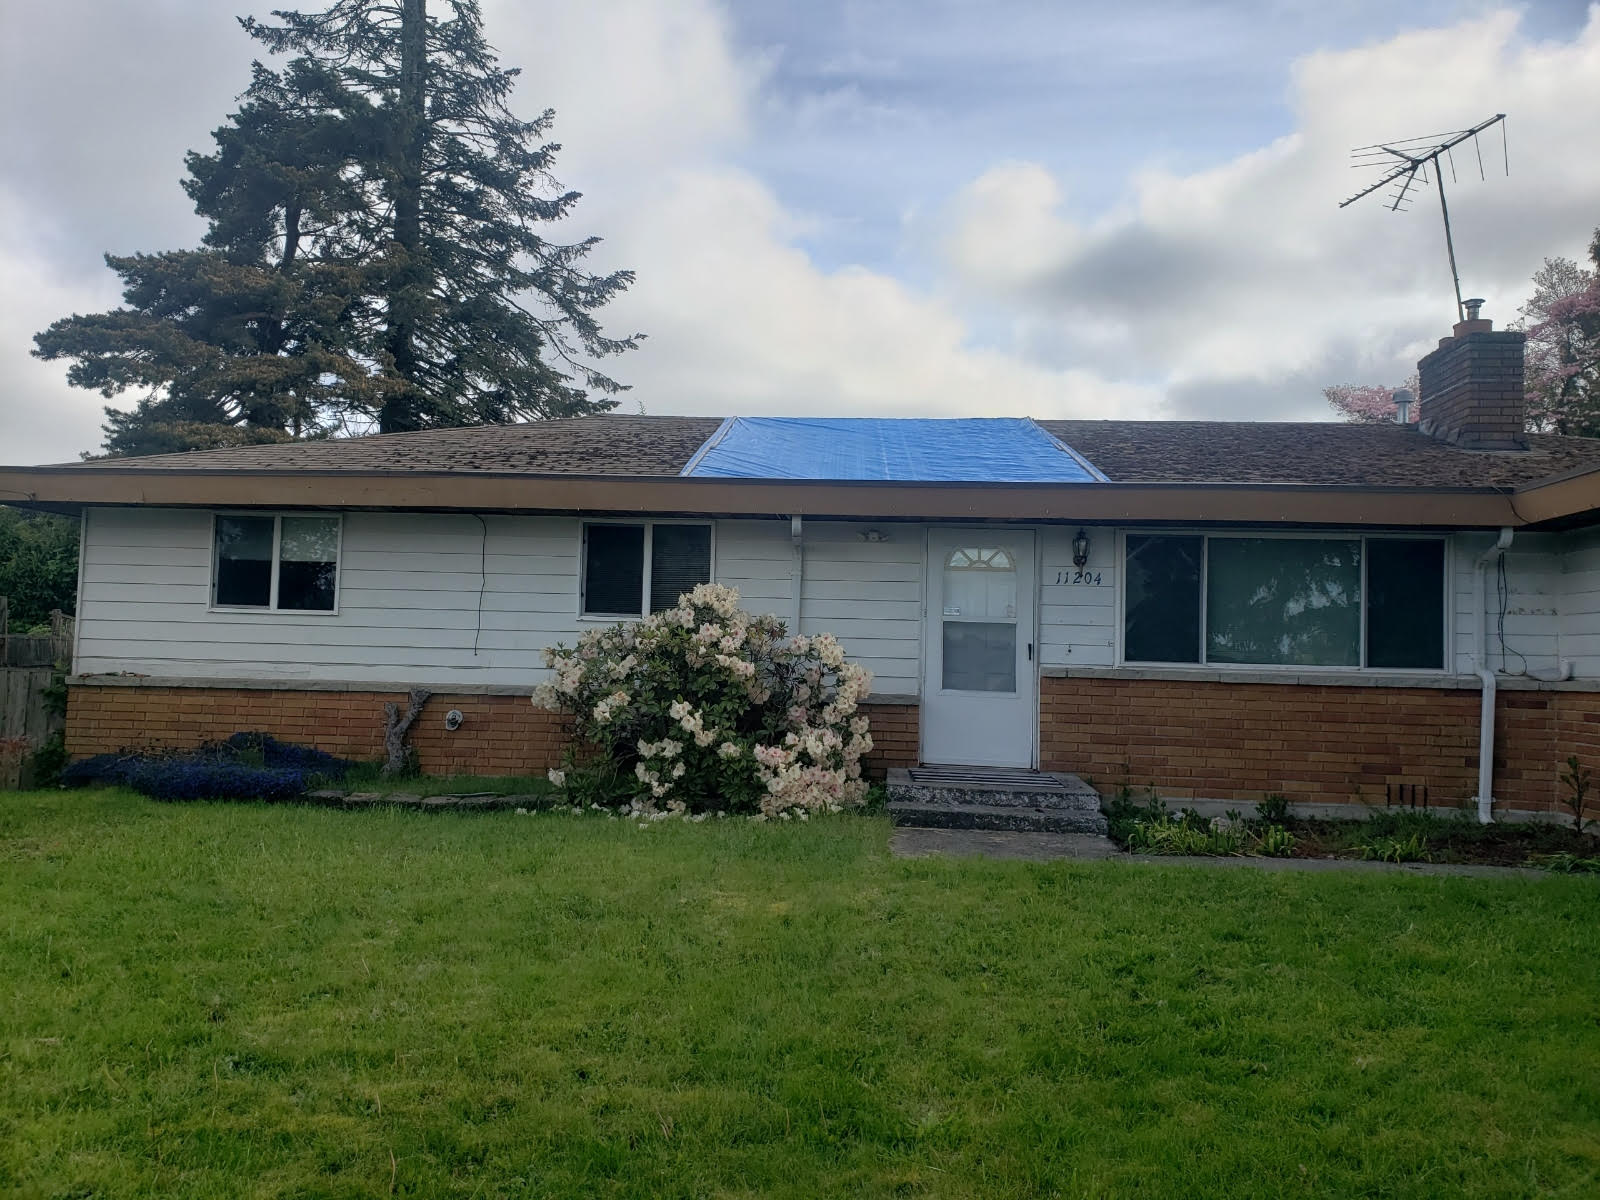 home with a damaged roof in Puget Sound, WA